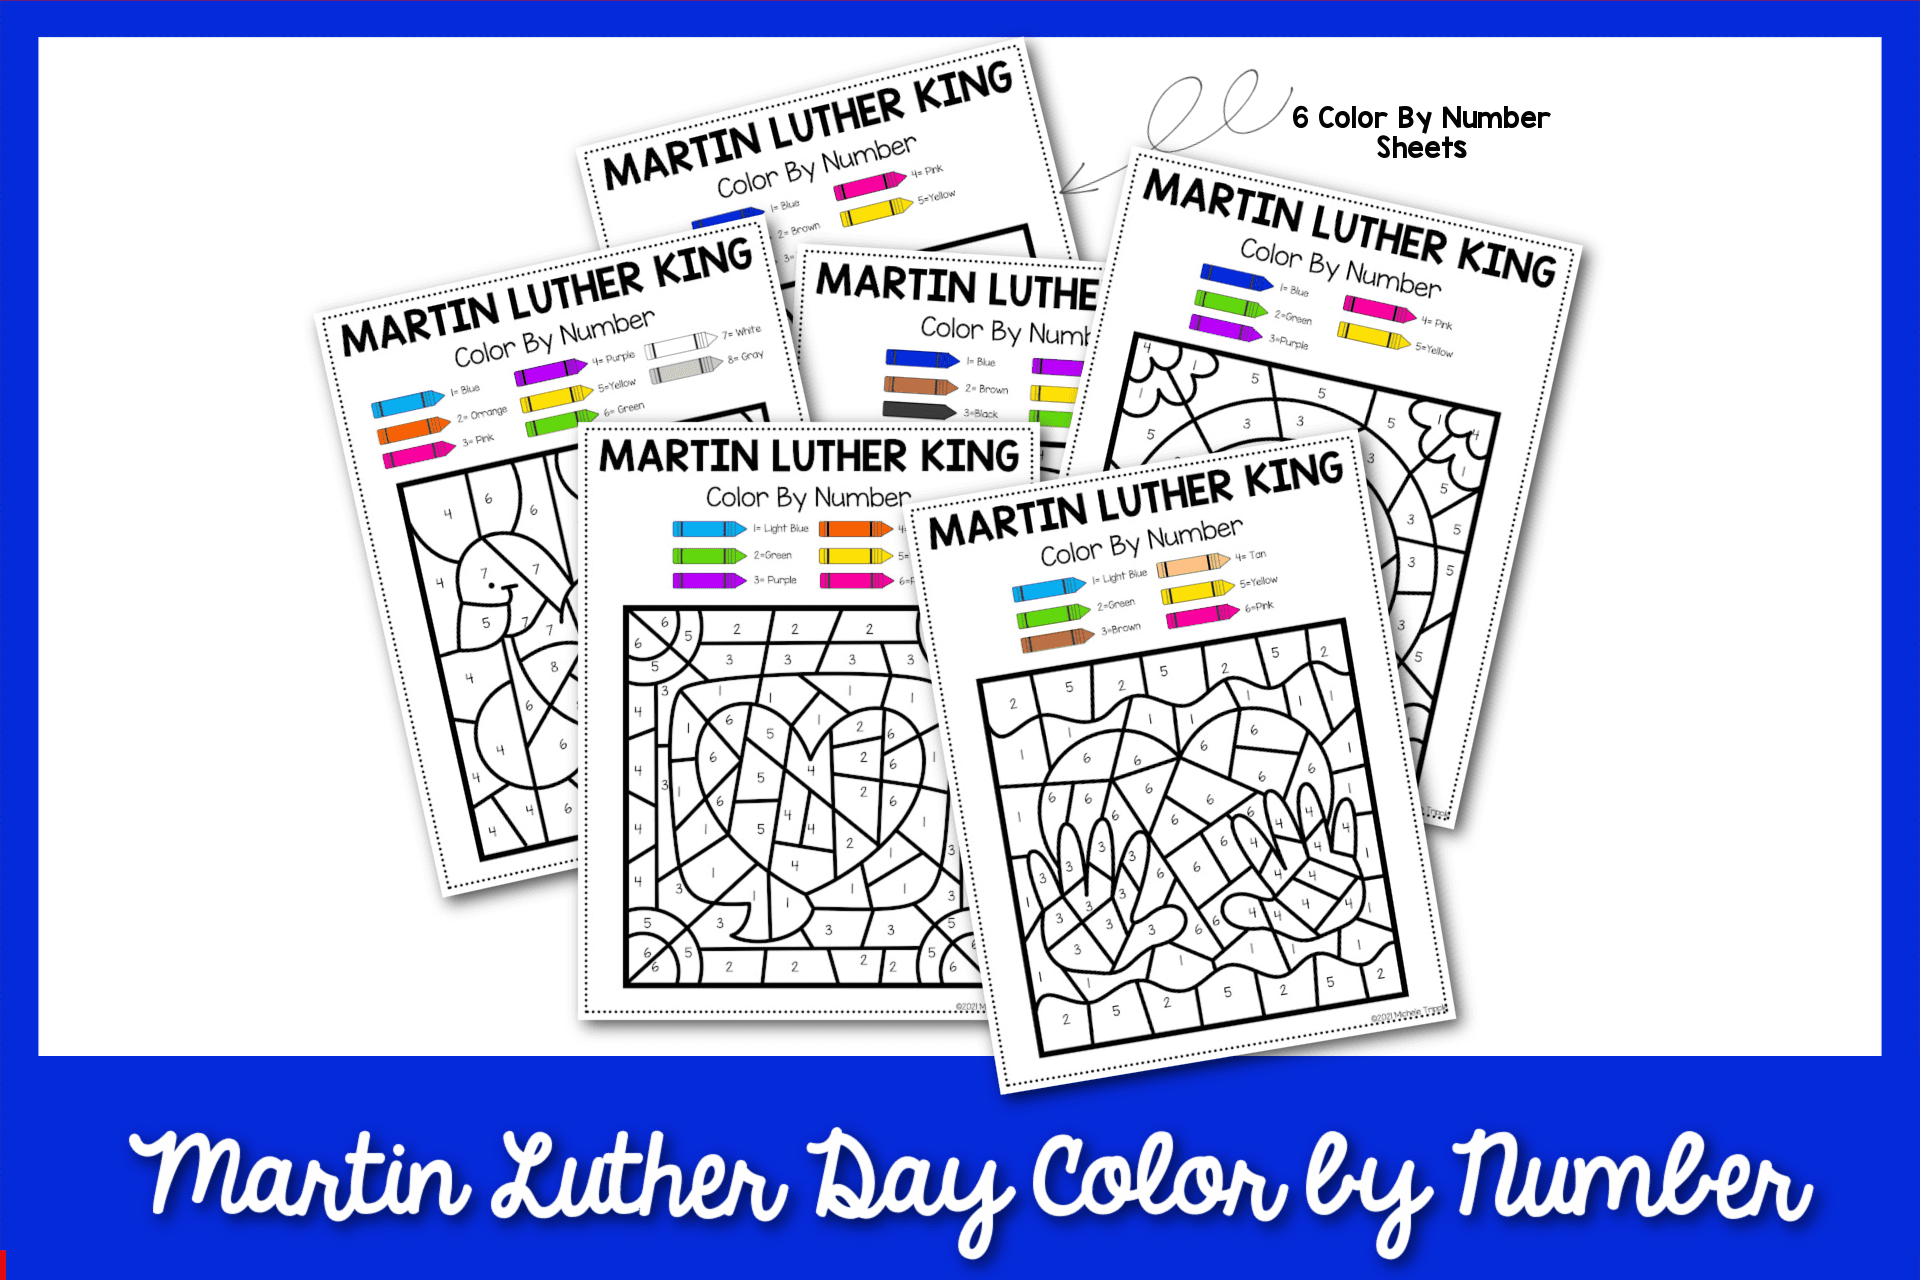 Feature: Martin Luther King color by number sheets with blue border